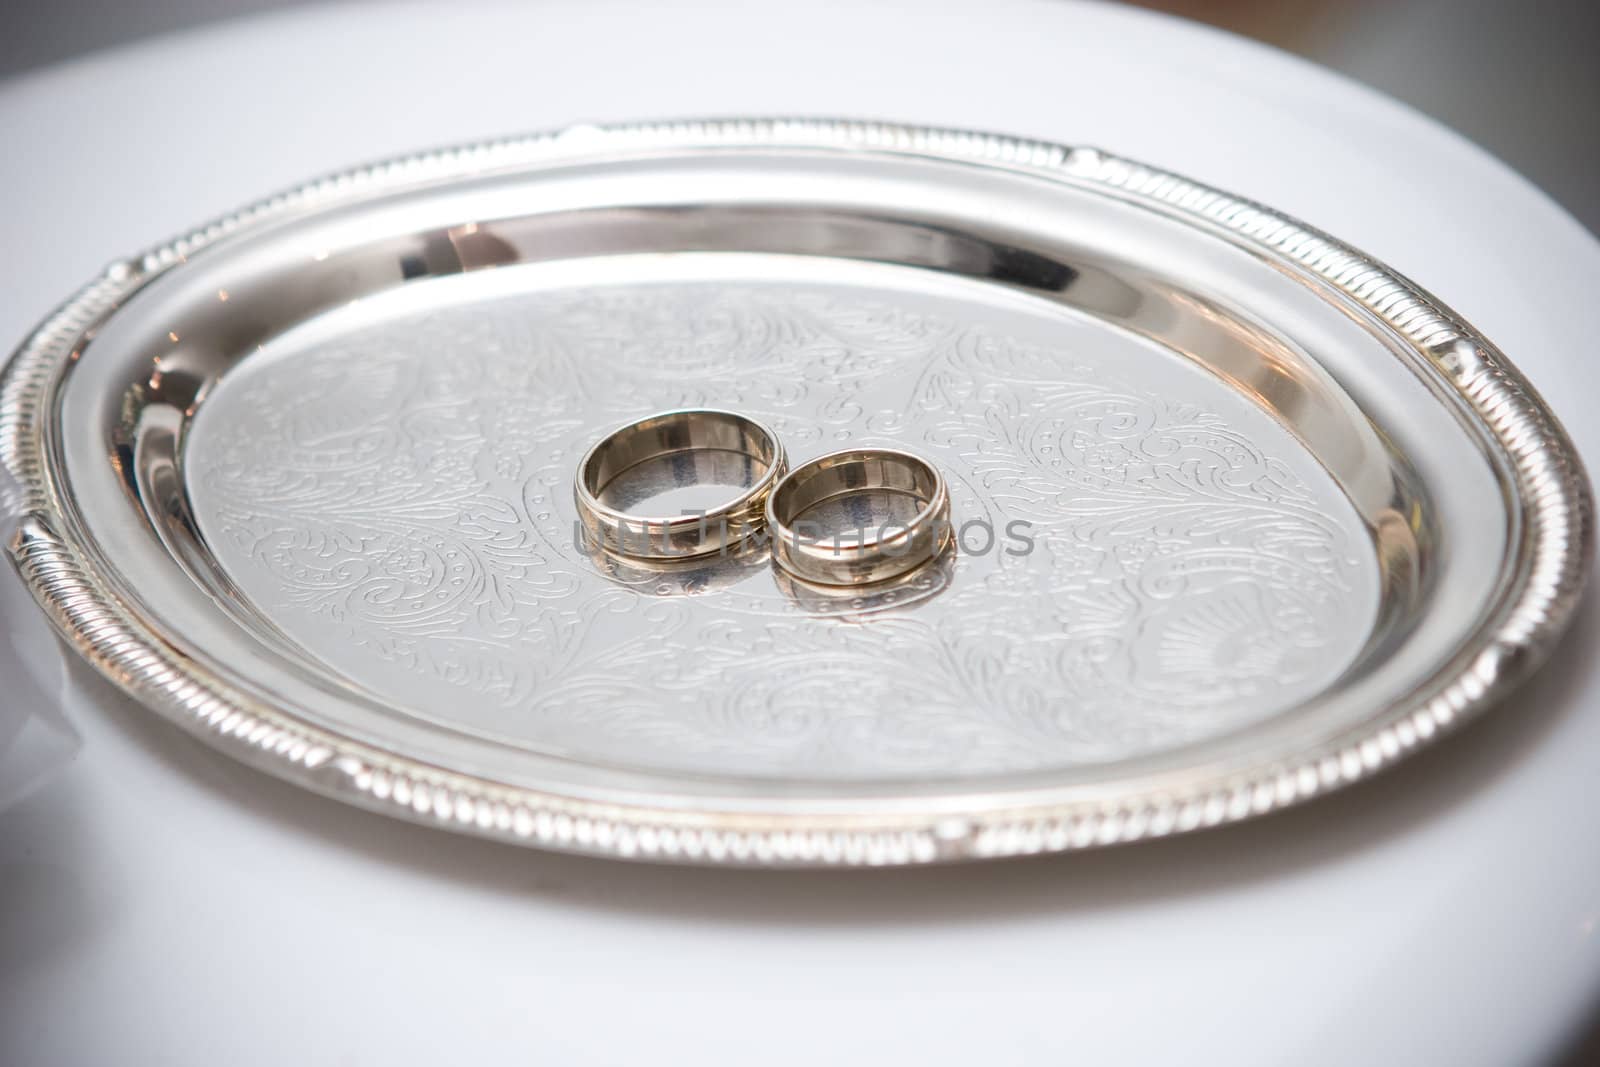 two wedding rings on the decorated plate